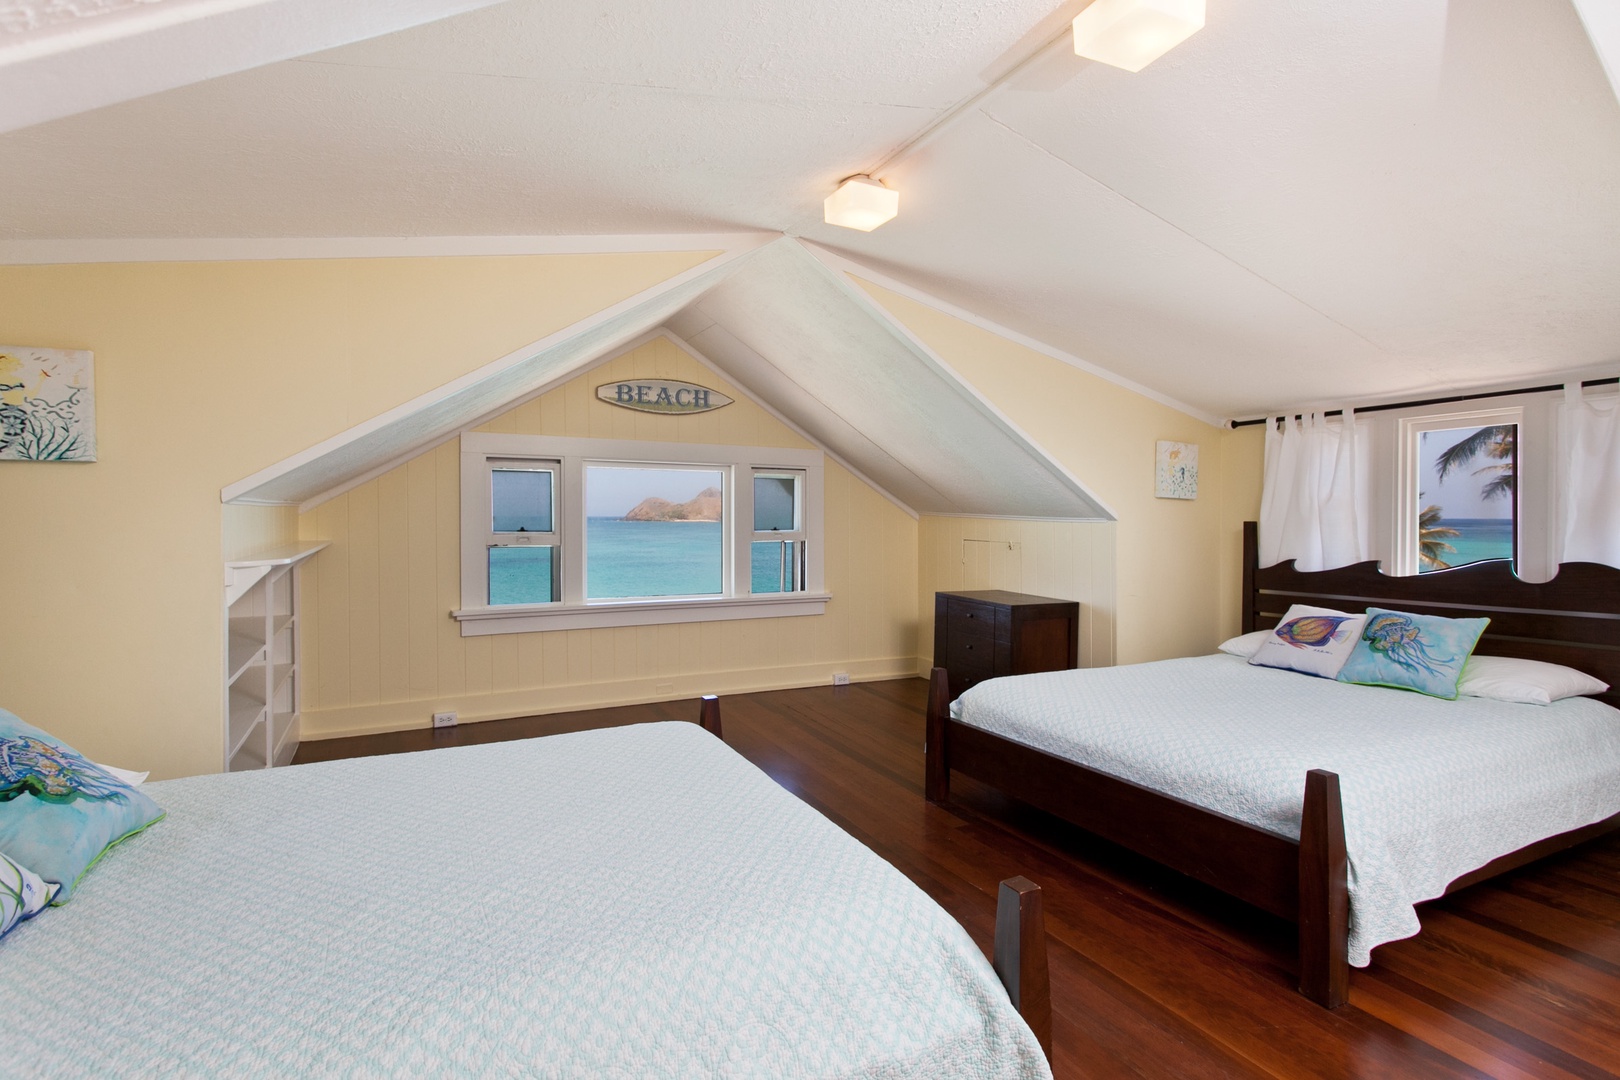 Kailua Vacation Rentals, Hale Mahina Lanikai* - Fourth guest bedroom with two queen beds.